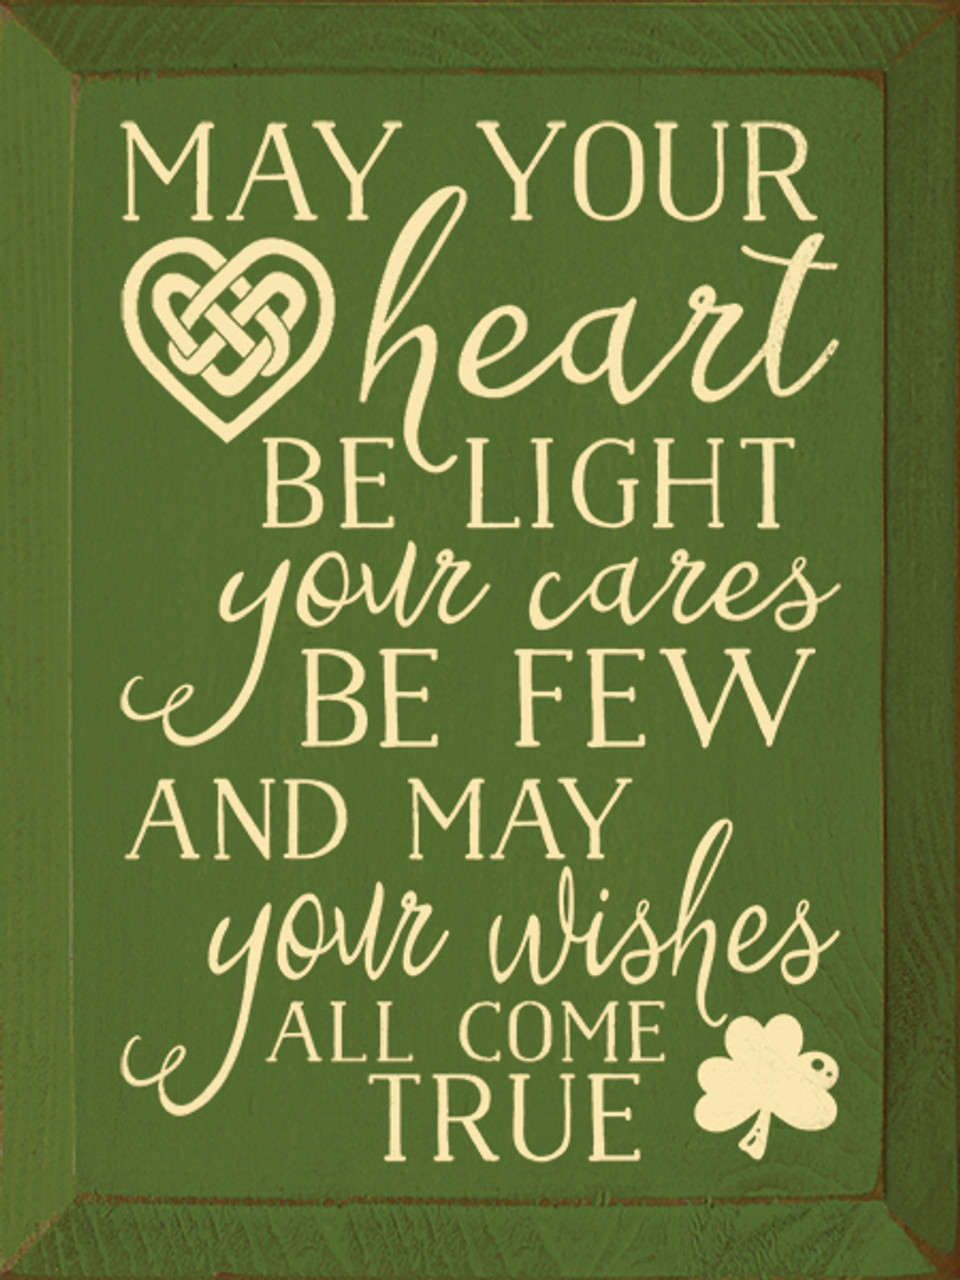 destillation Historiker Født May your heart be light, your cares be few, and may your wishes all come  true|Inspirational Wood Sign| Sawdust City Wood Signs